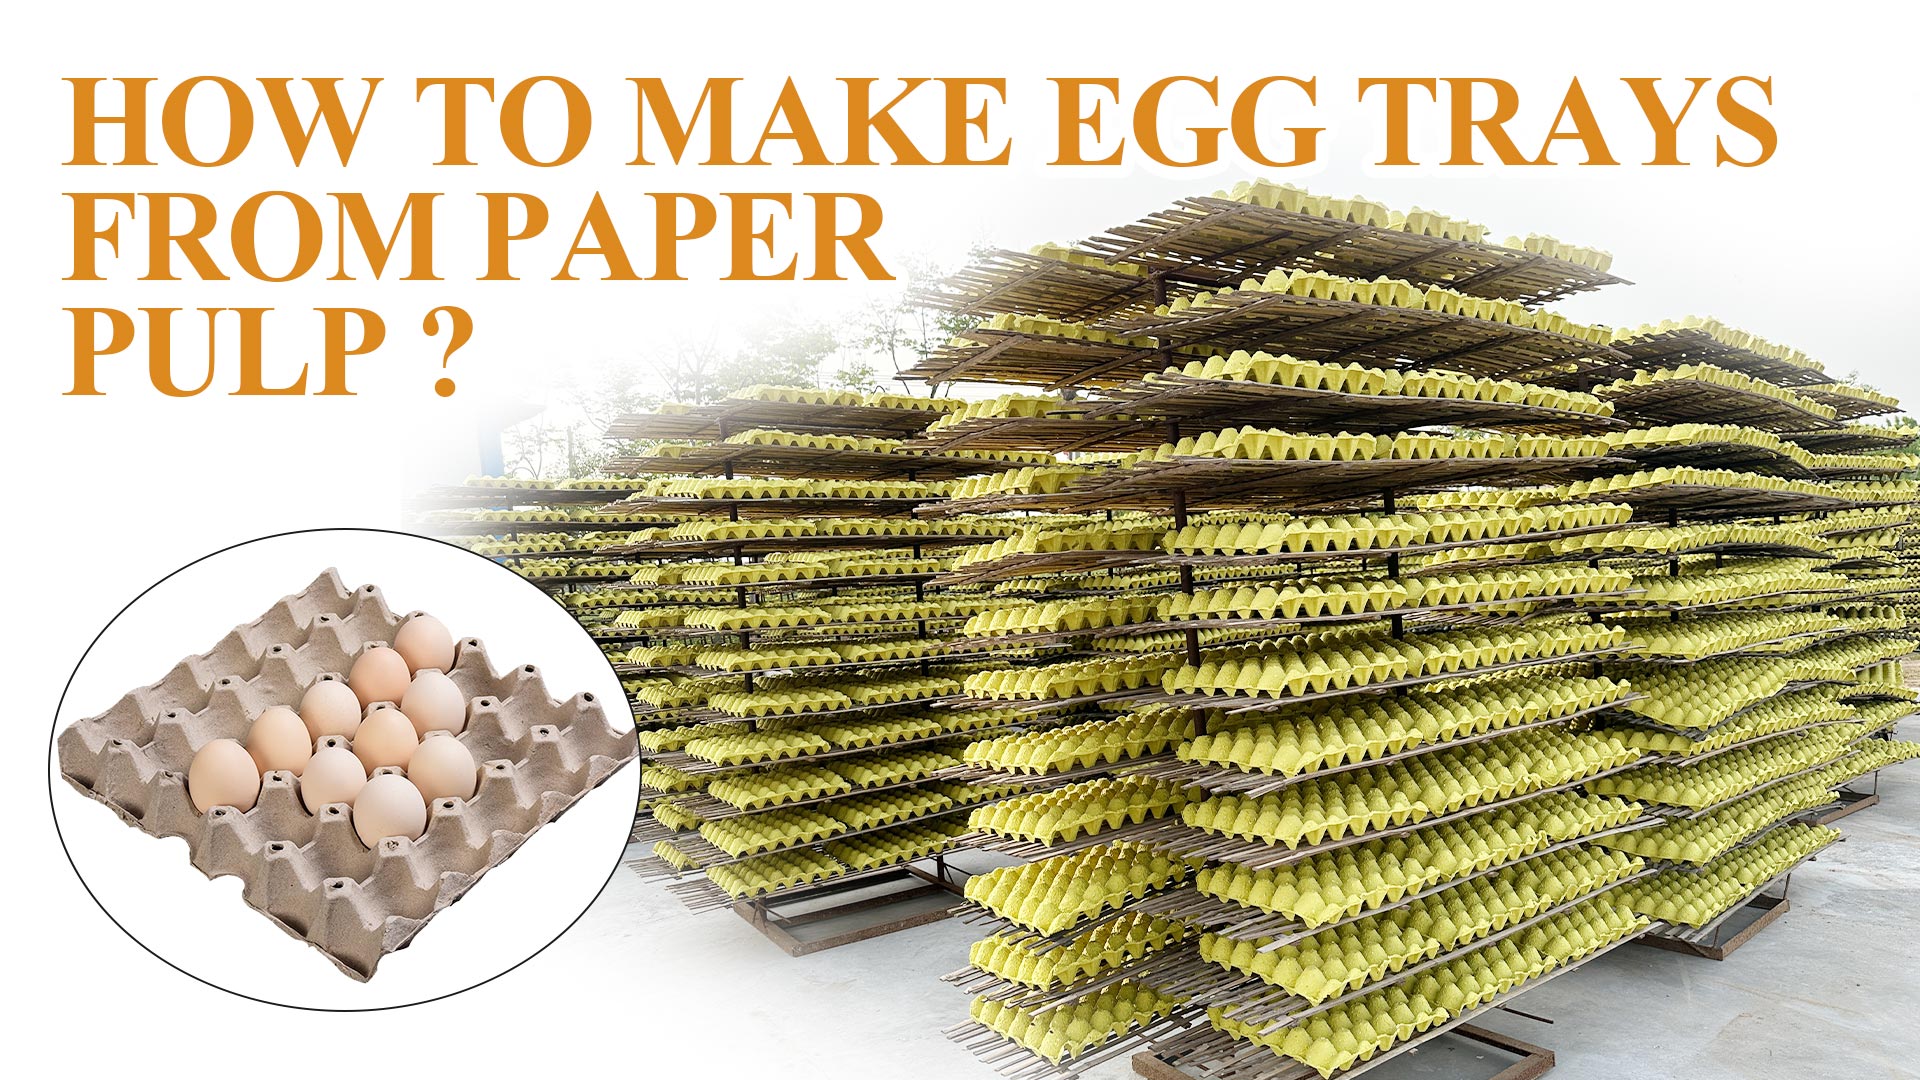 Mass production for egg trays in plant